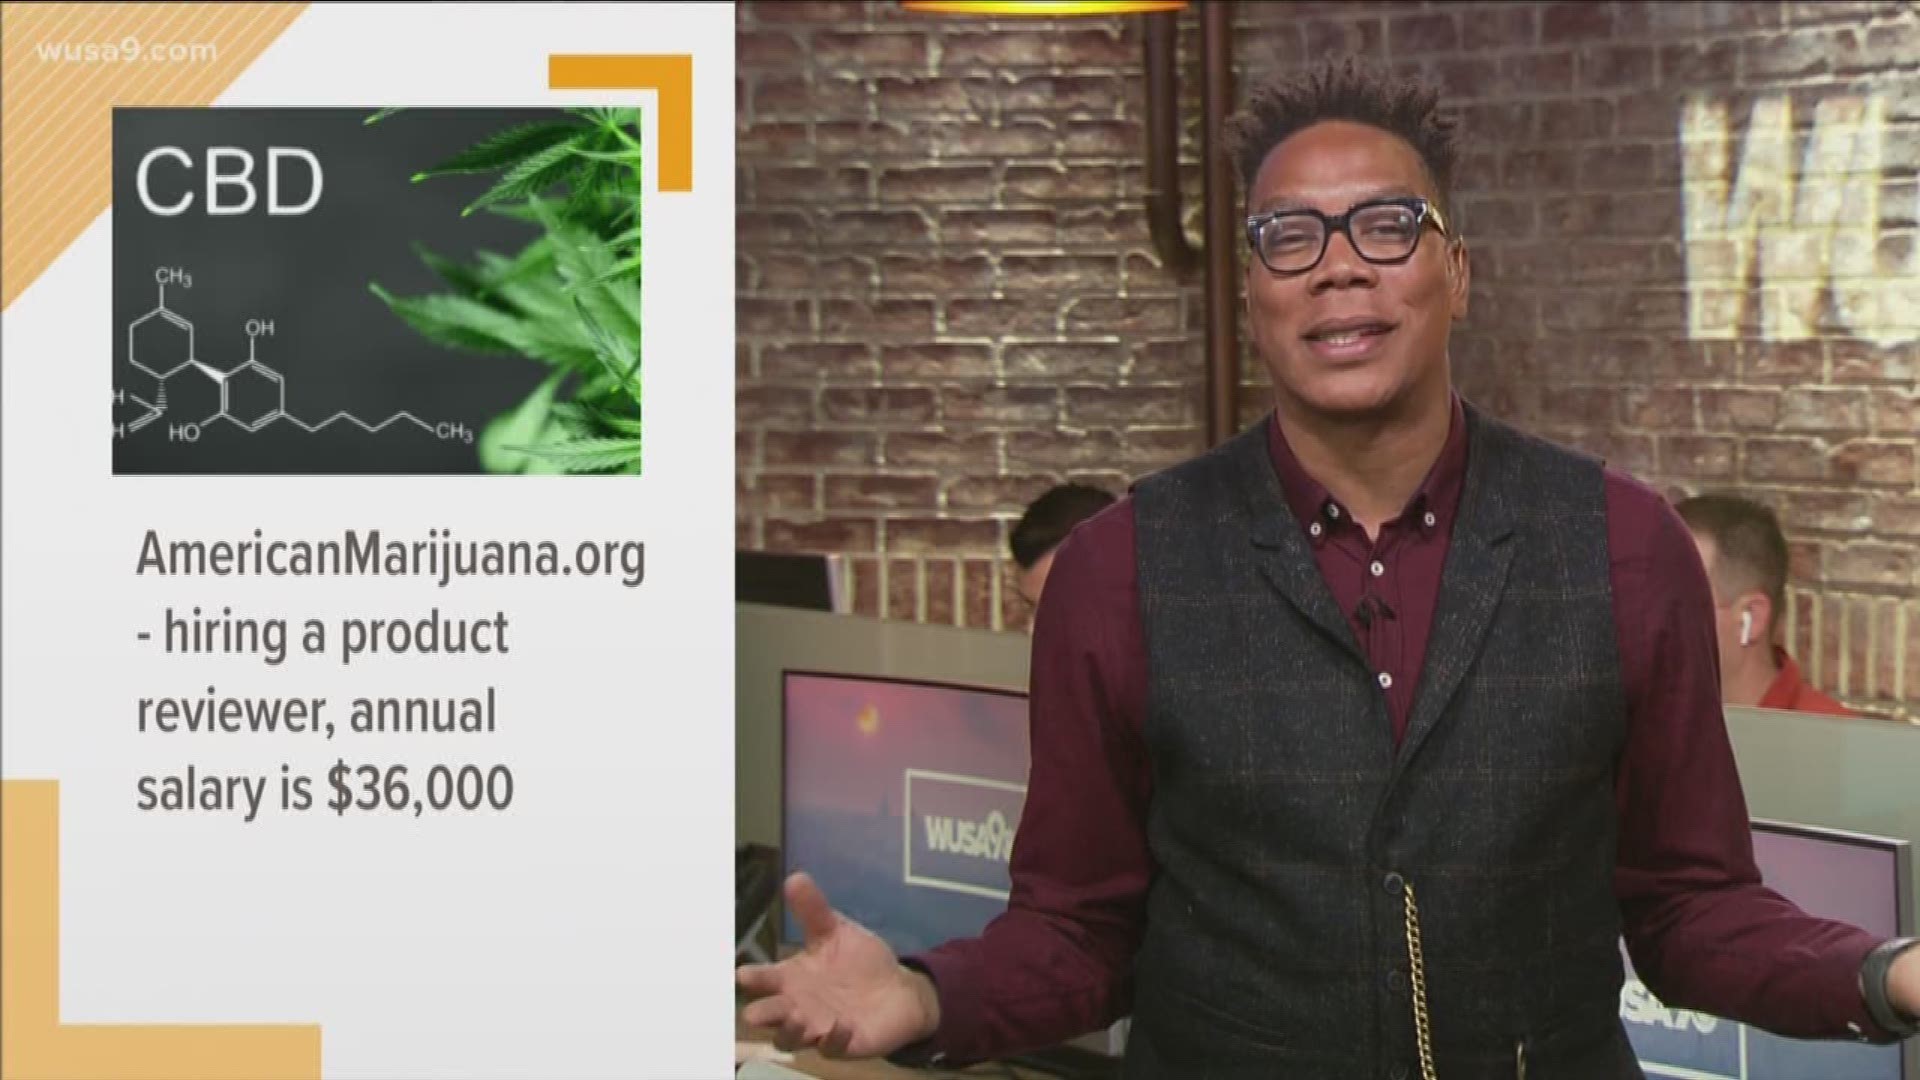 AmericanMaarijuana.org wants to hire a person to smoke marijuana for an annual salary of $36k. This is In Other News, with news that isn't on your radar.